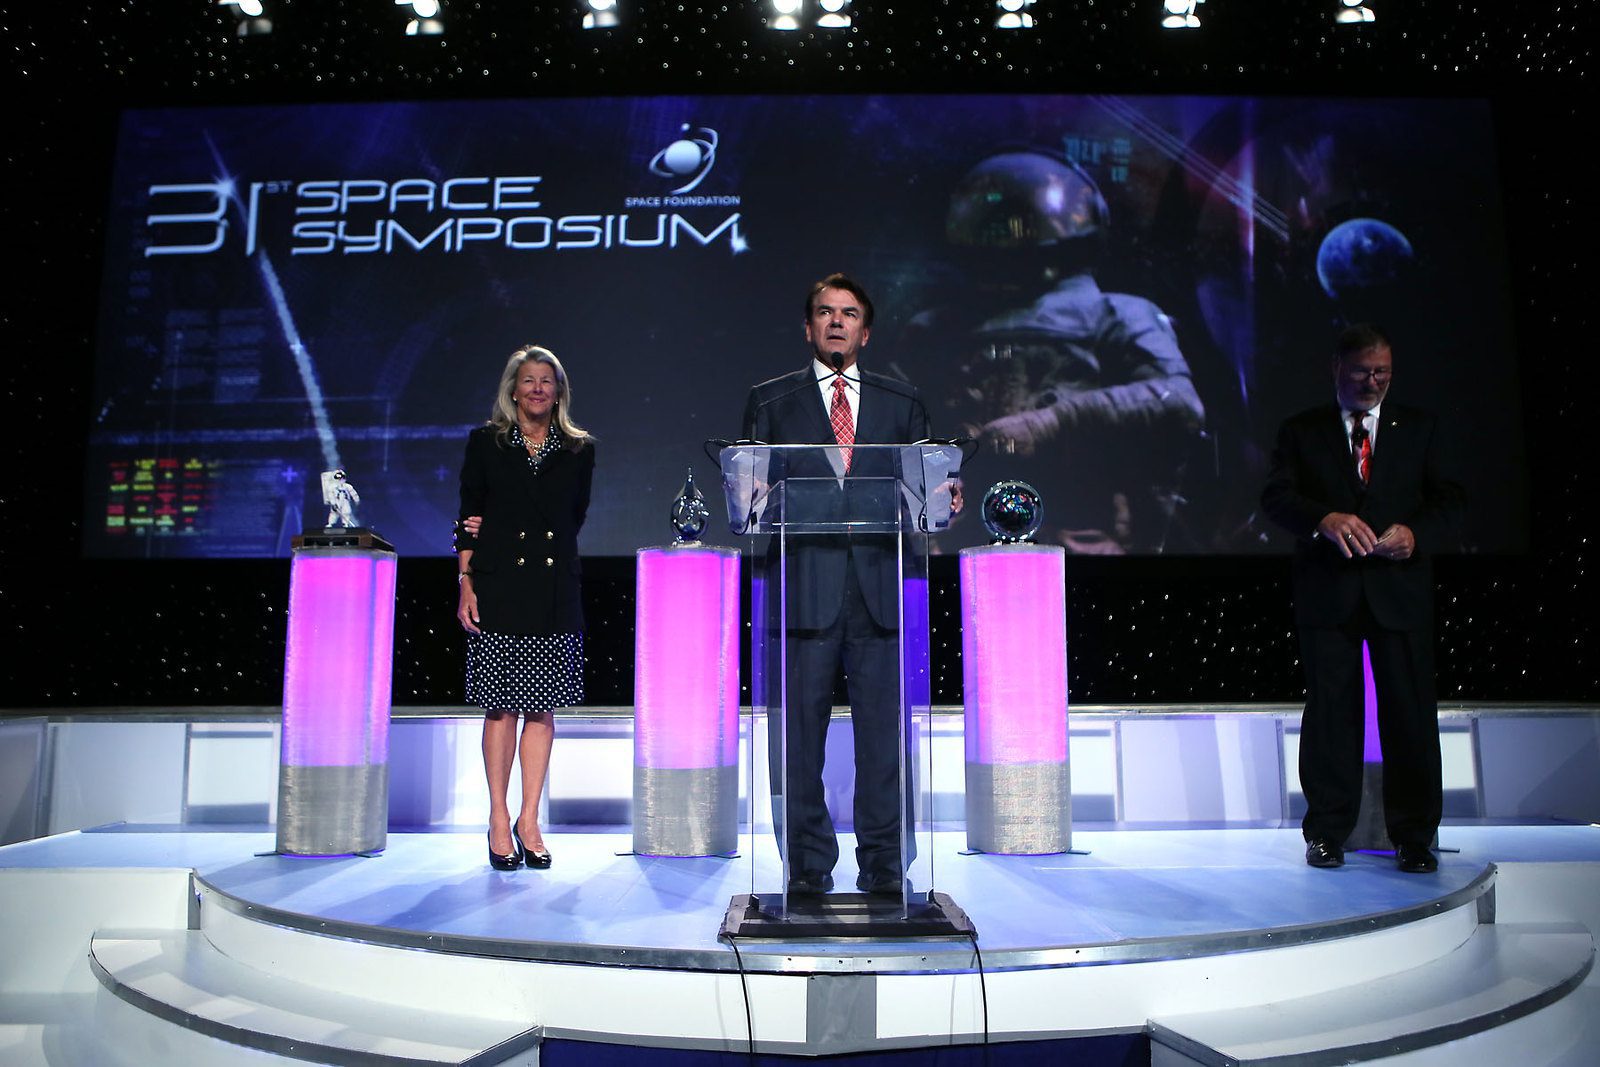 High Honors Awarded at 37th Space Symposium